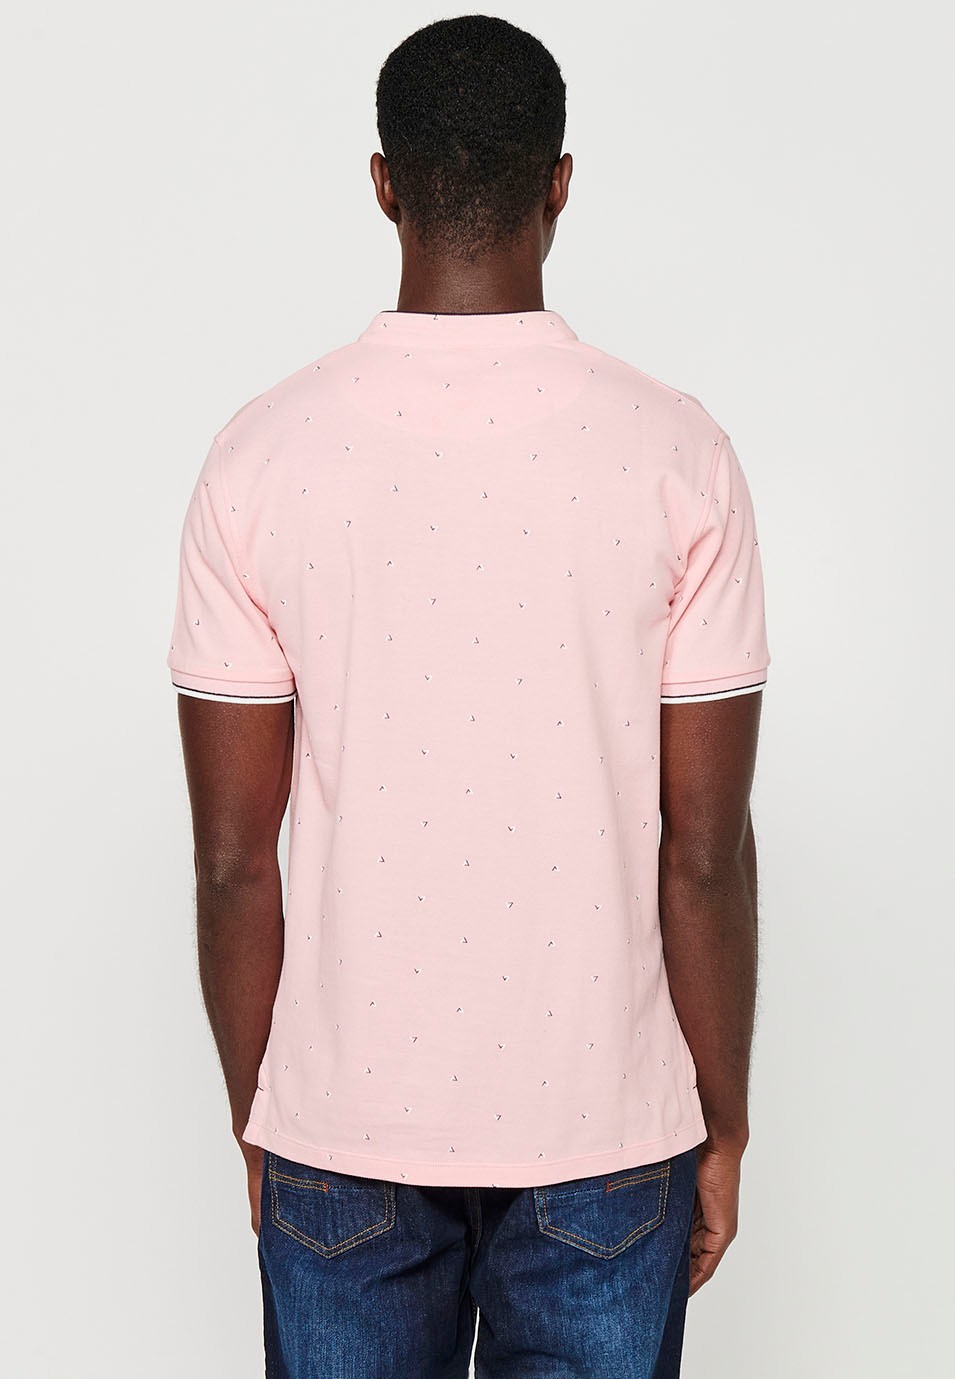 Short-sleeved Cotton Polo with Round Neck with buttoned opening and Finished with Side Cuts in Pink for Men 5